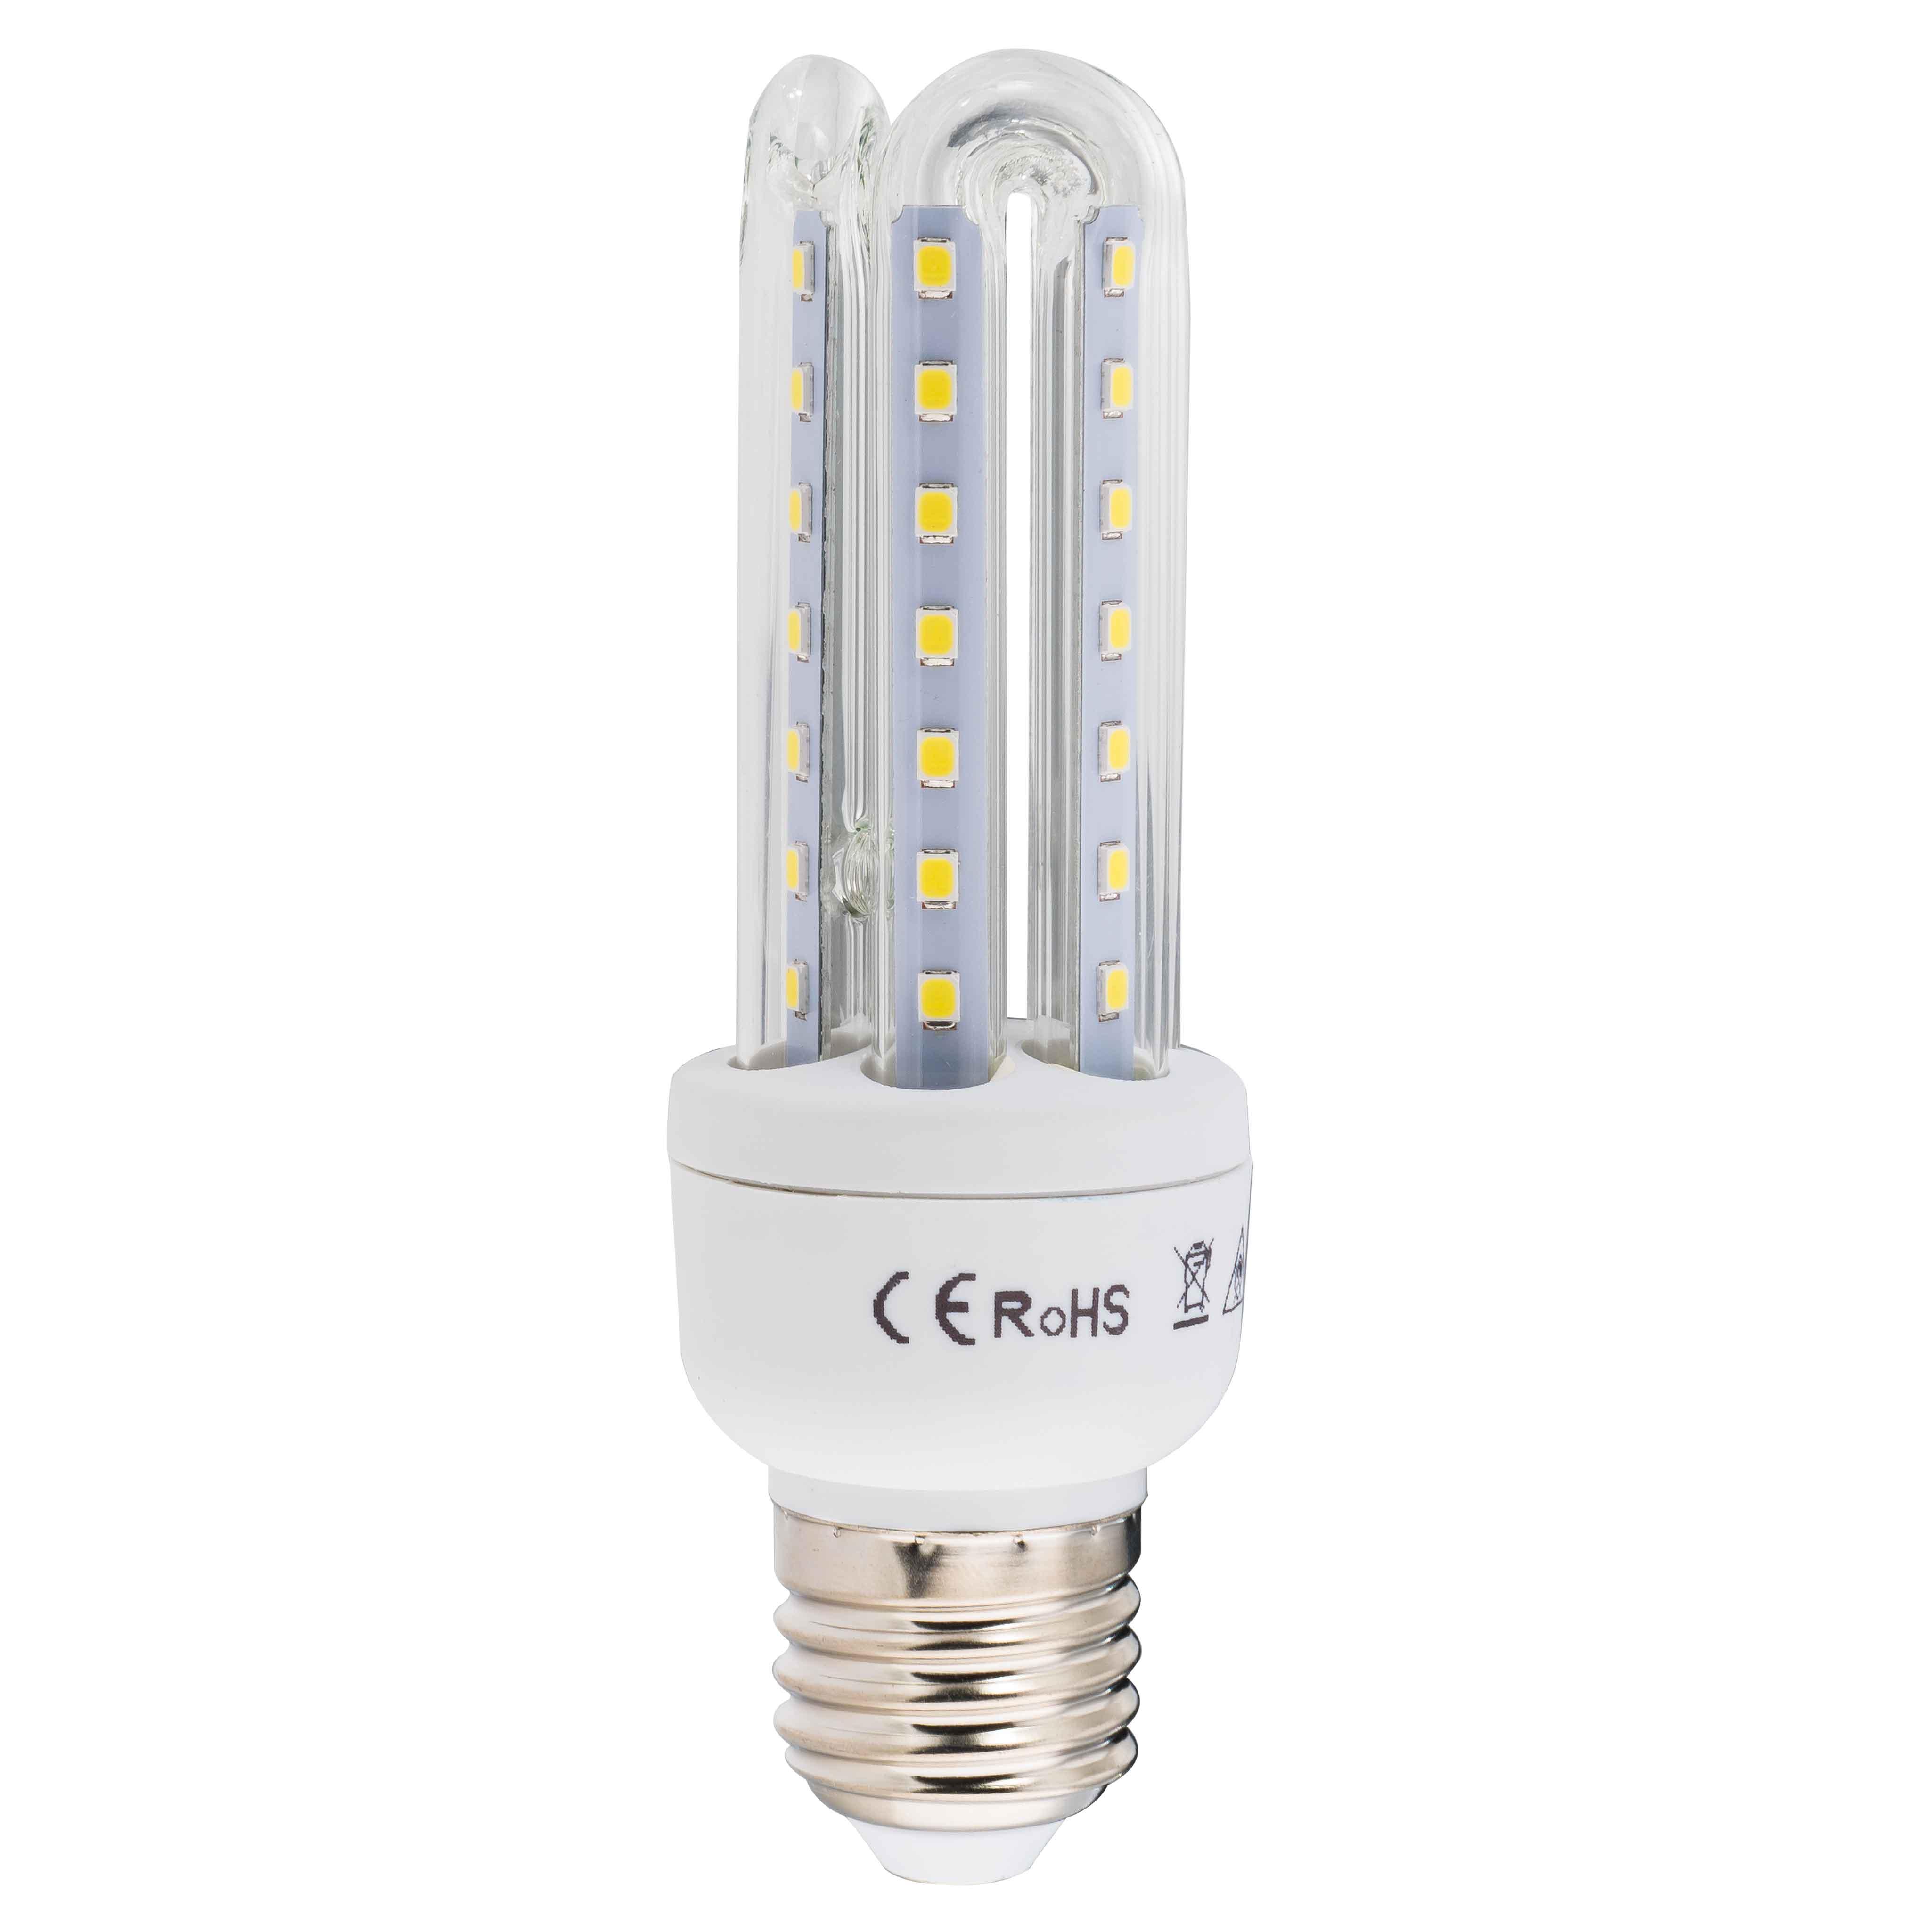 Ampoule led ronde e27 4w blanc/froid - Provence Outillage